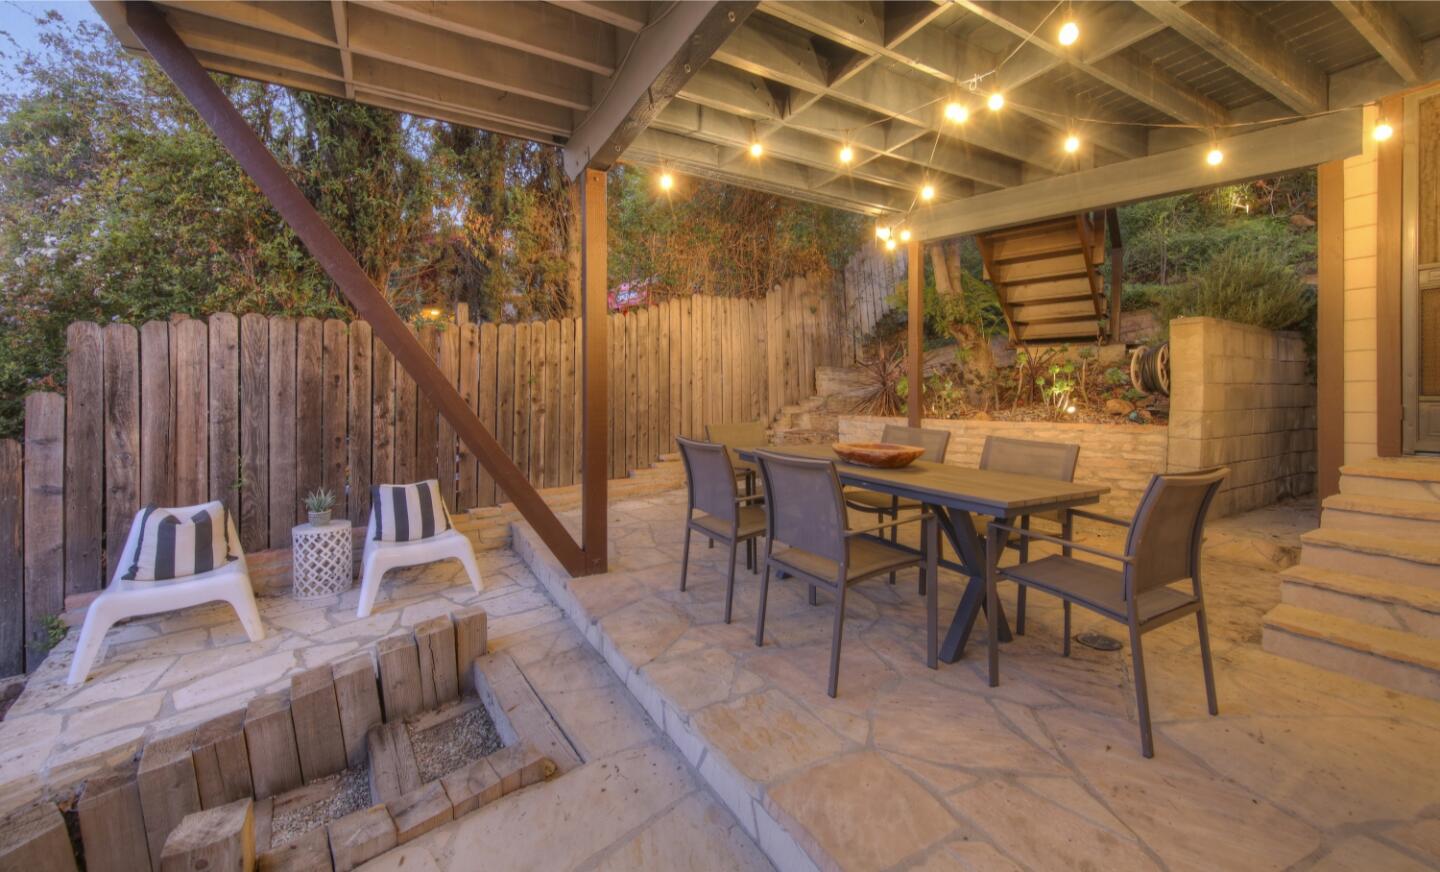 The dining patio.